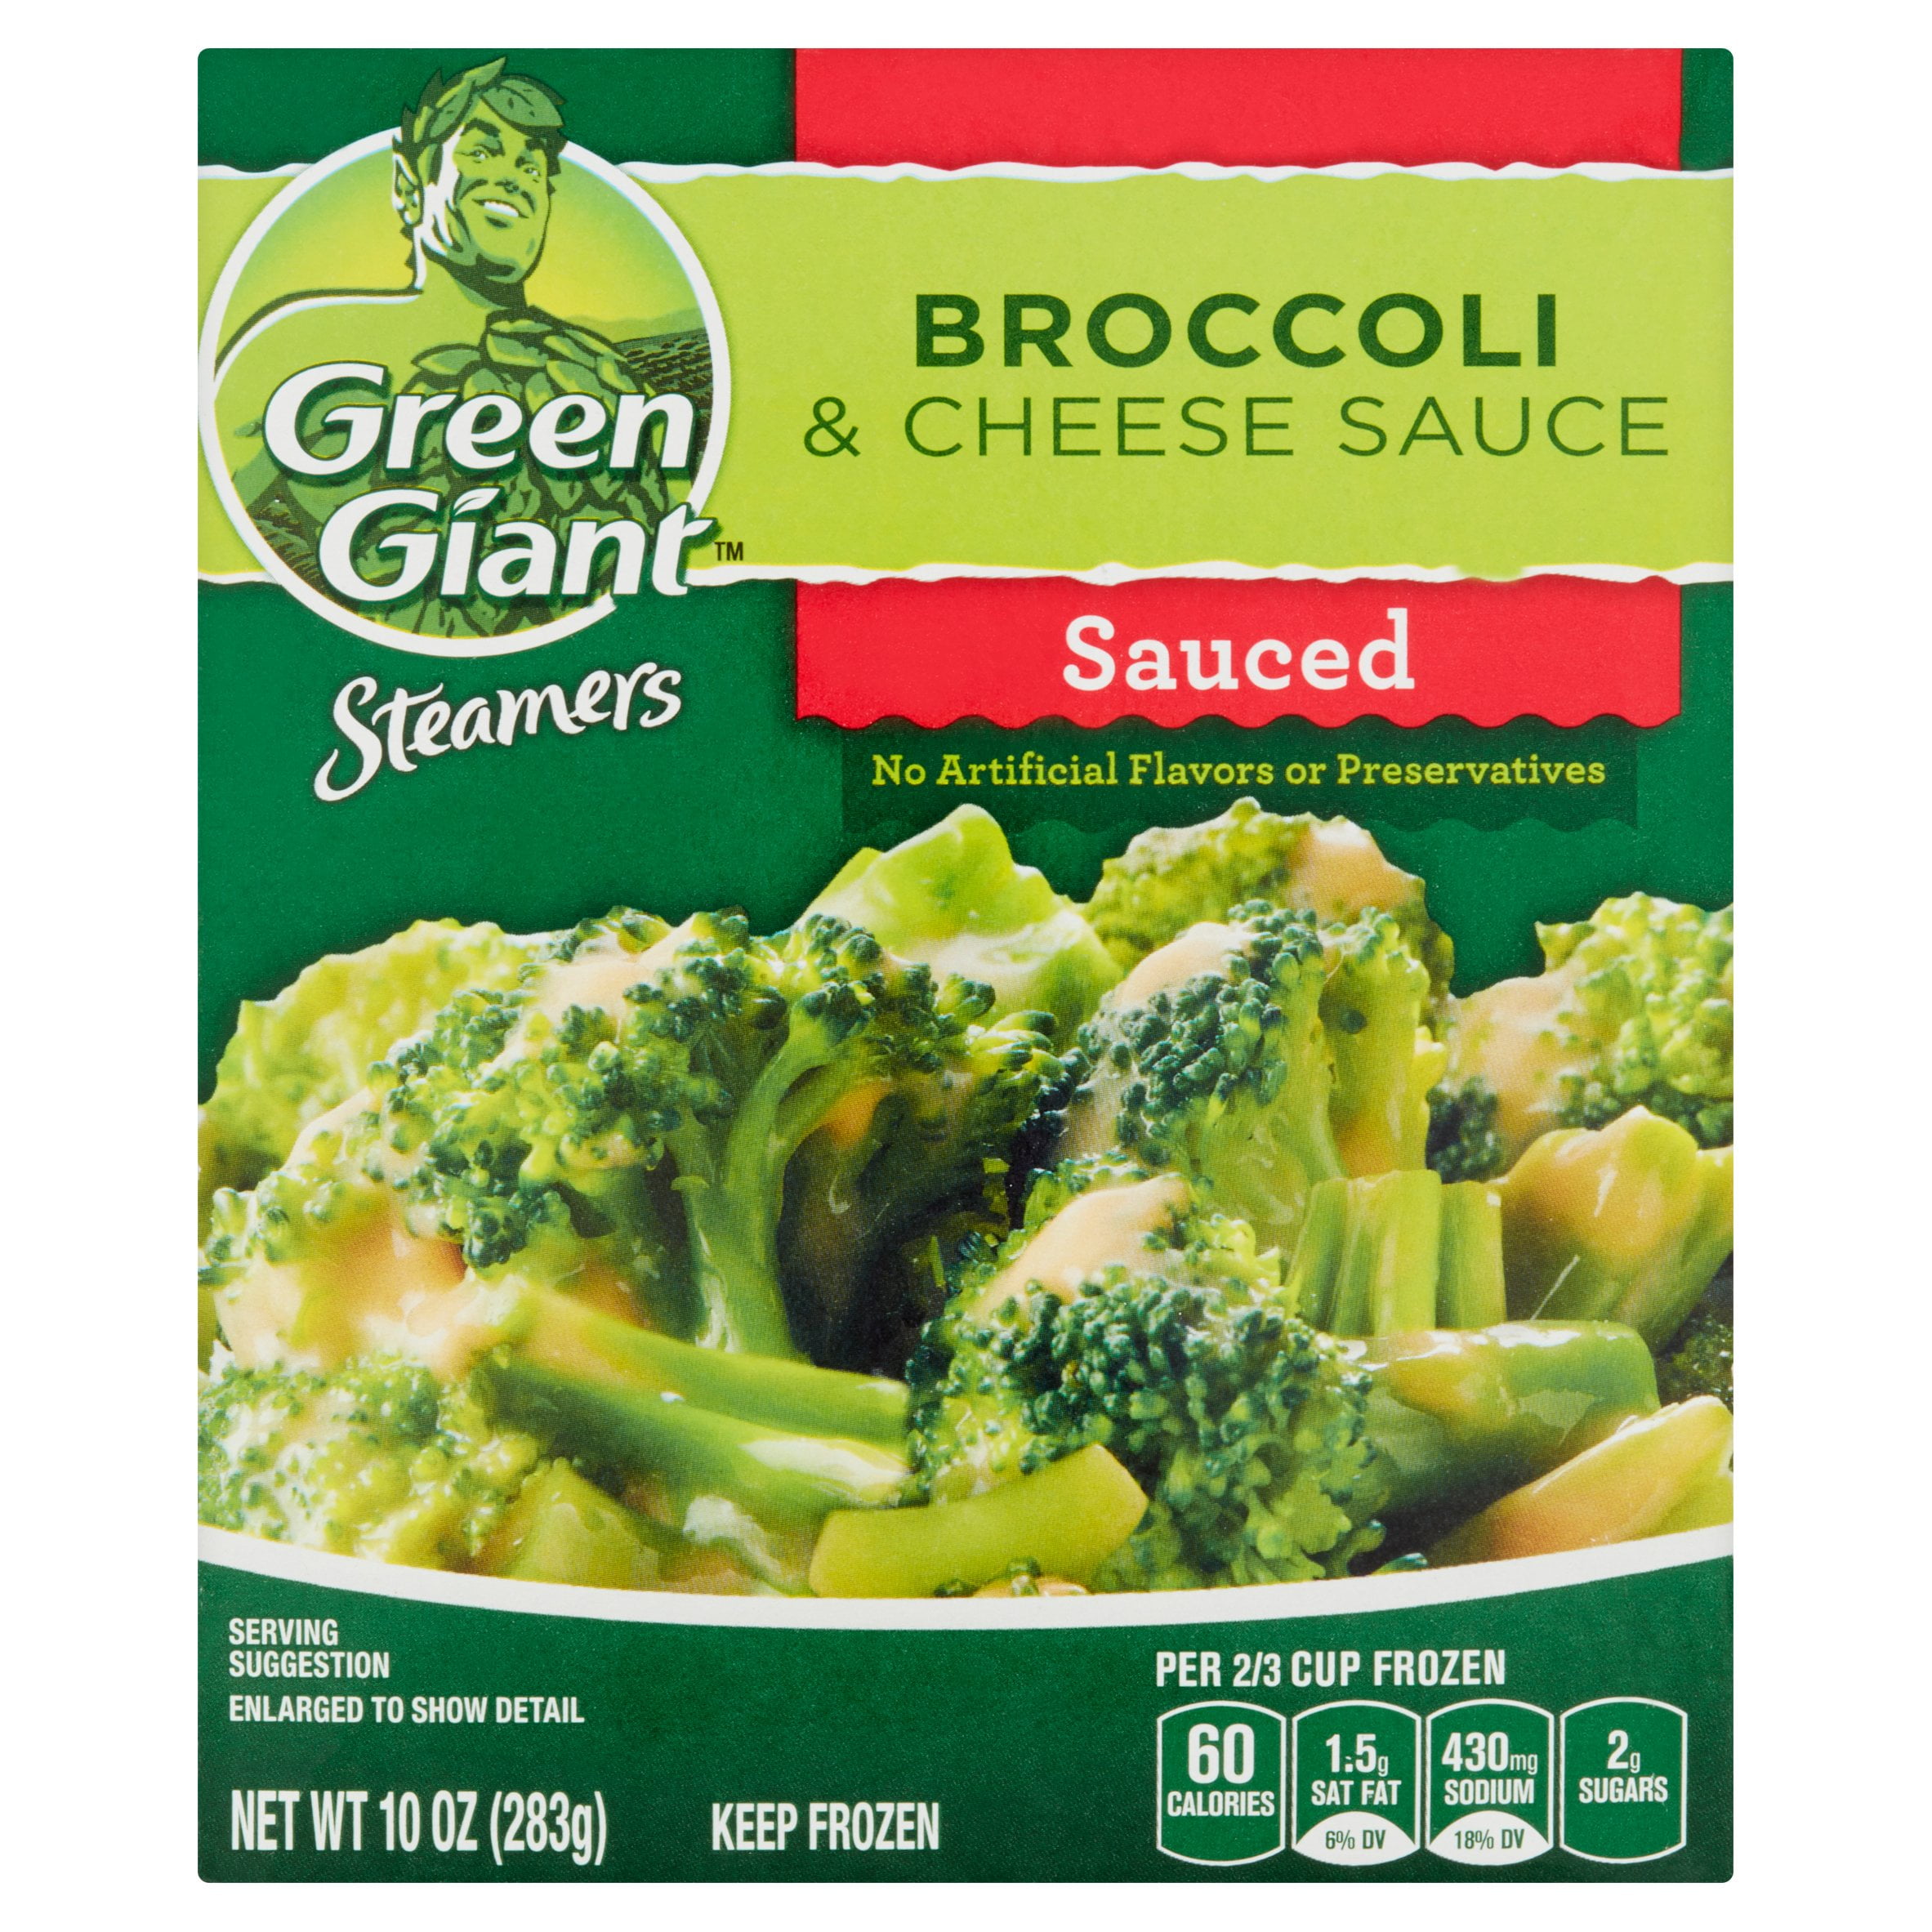 Green Giant Steamers Sauced Broccoli & Cheese Sauce, 10 oz ...